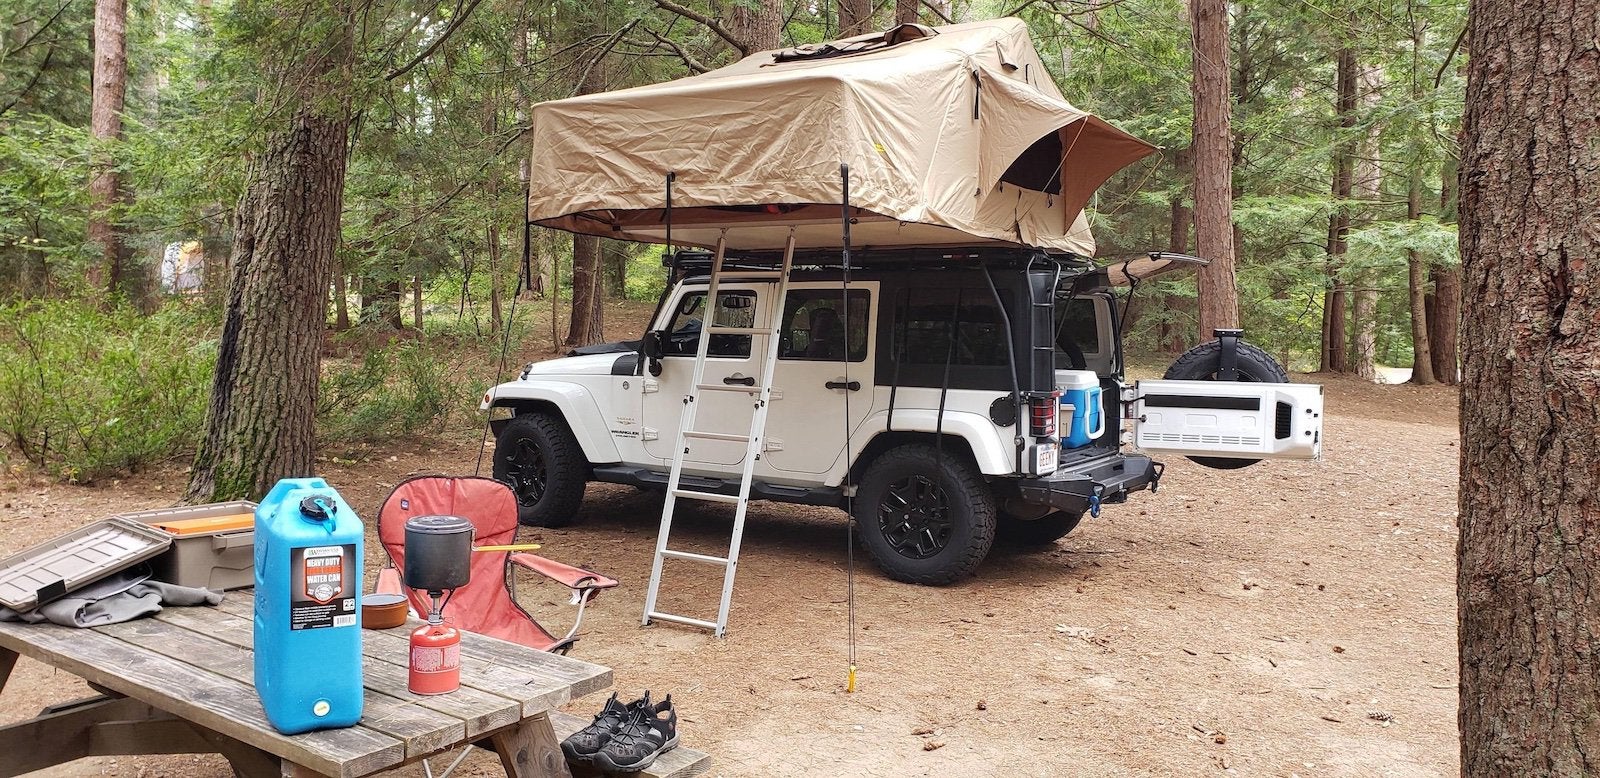 Looking for suggestions for trailer bases for an overland build. : overlanding